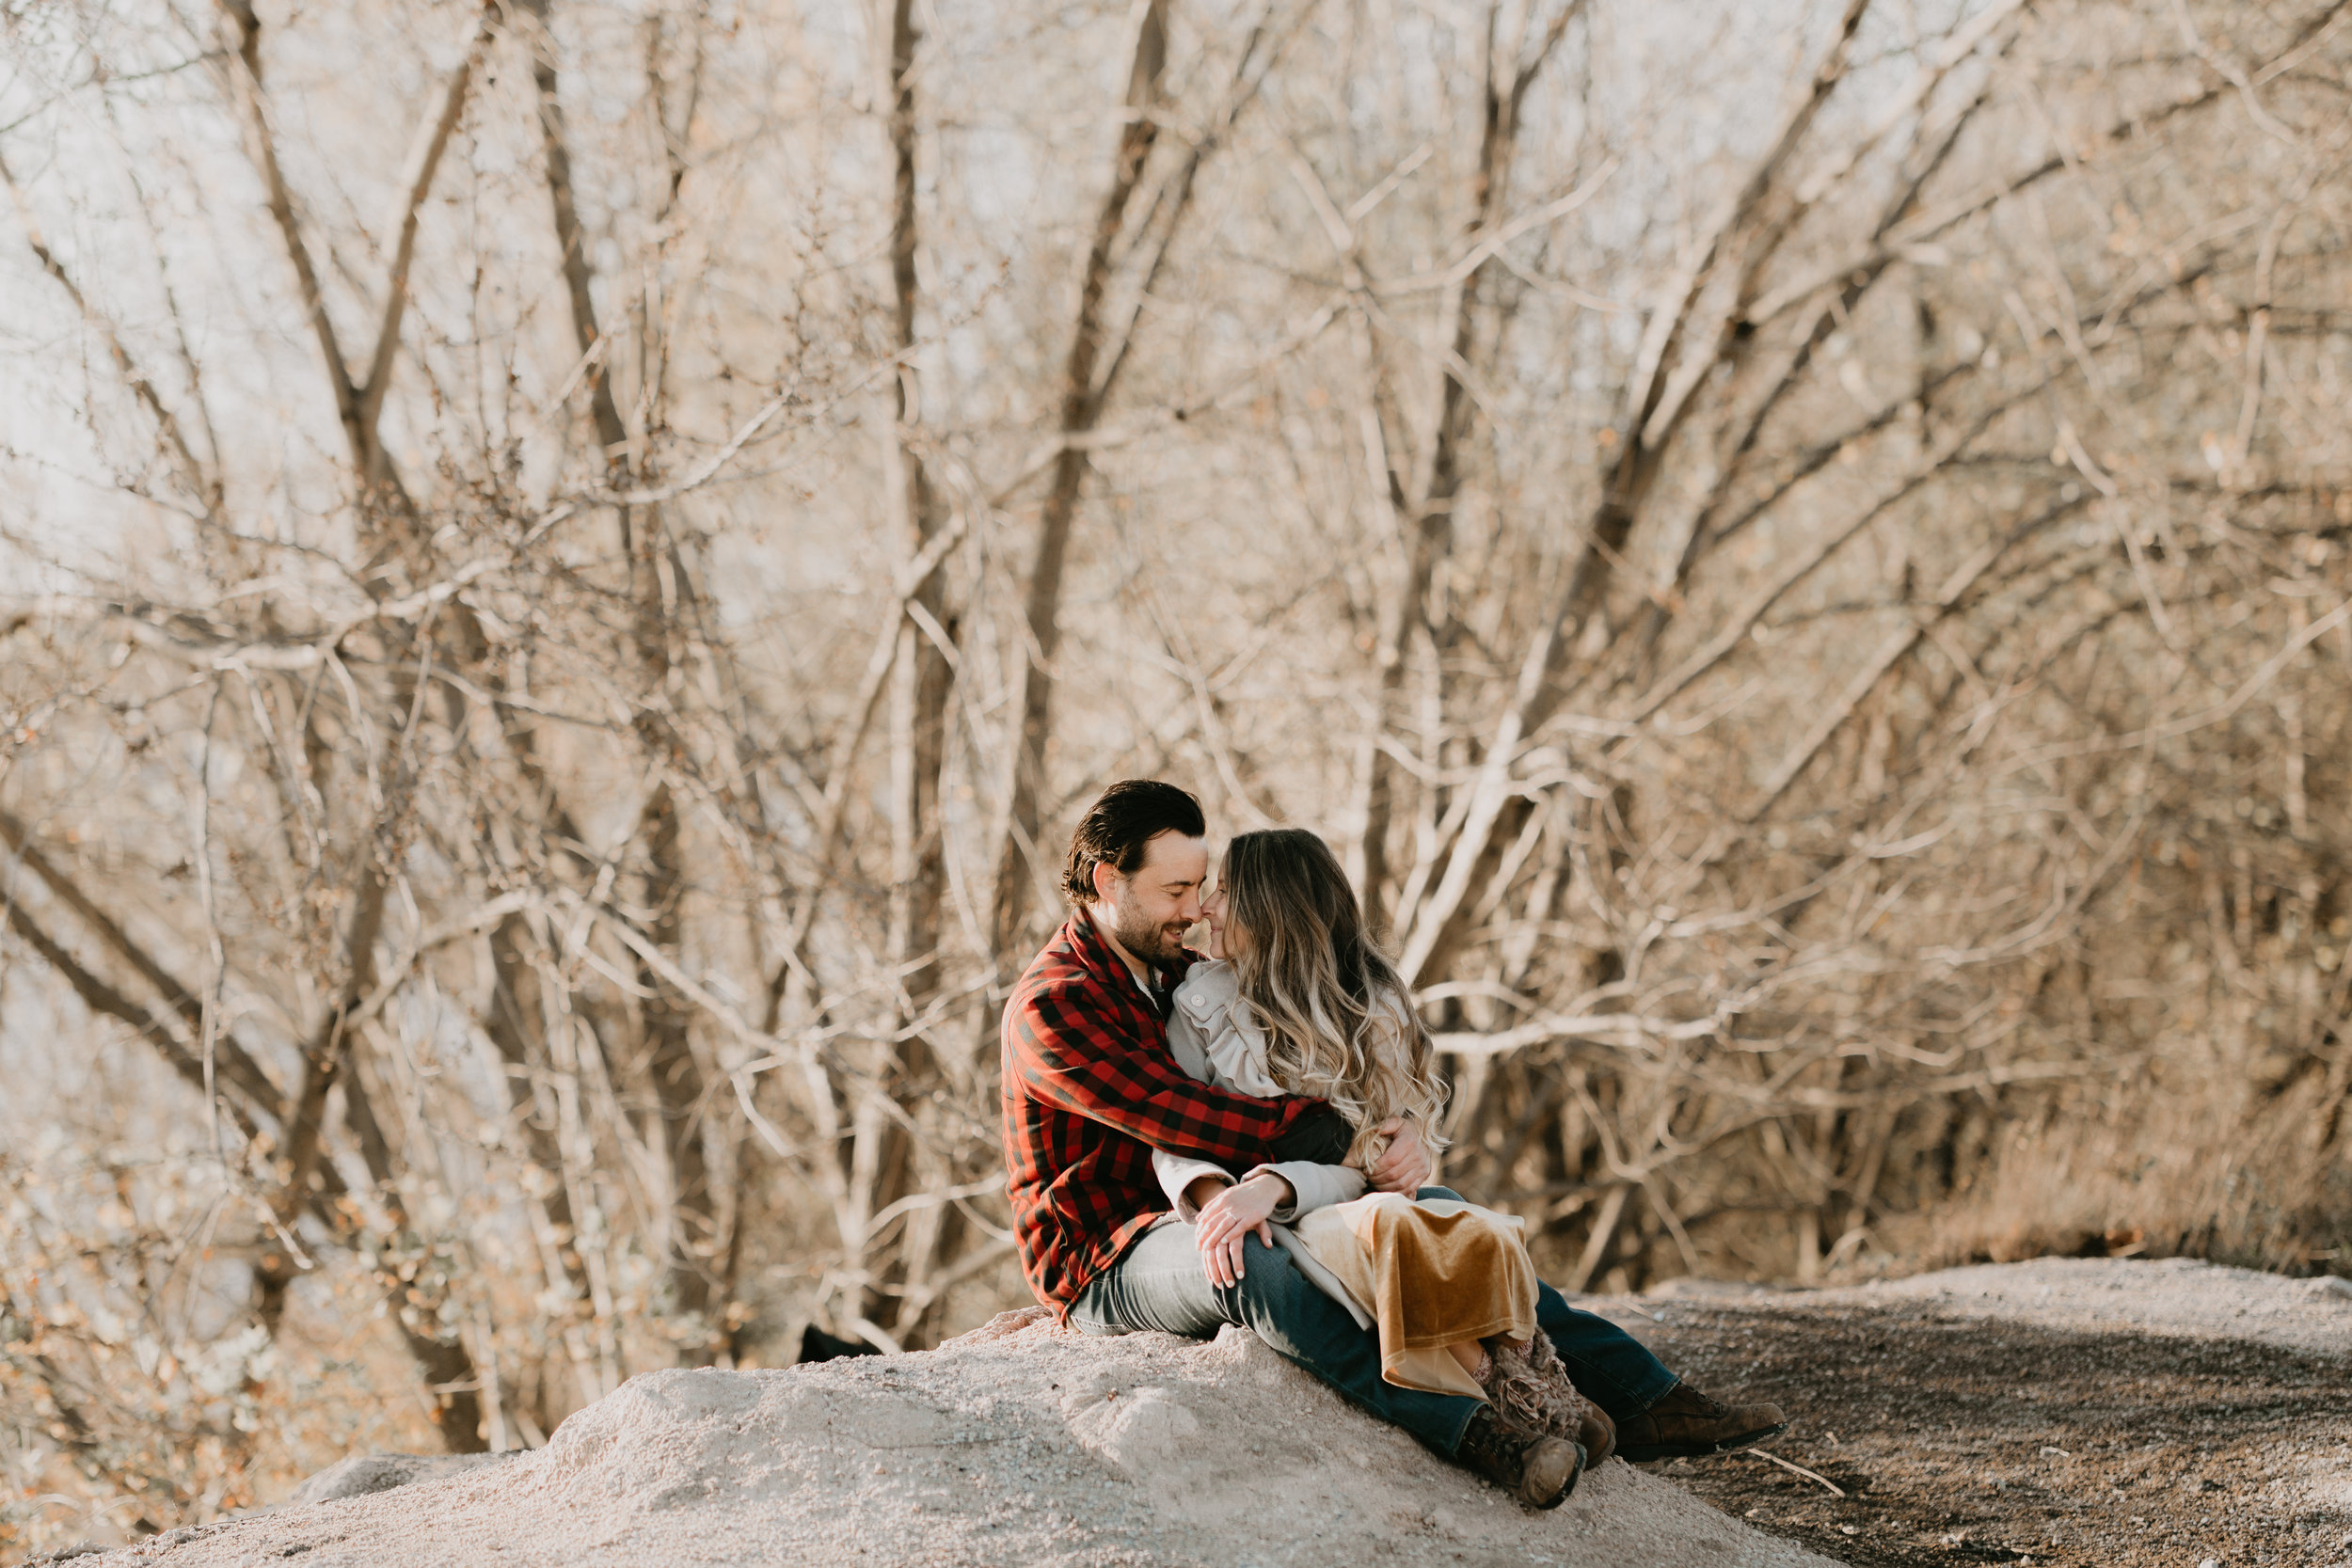 nicole-daacke-photography-white-cliffs-of-conoy-in-lancaster-pa-pennsylvania-adventure-session-adventure-elopement-photographer-engagement session-in-lancaster-pa-photographer-golden-sunset-winter-solstice-wedding-riverside-elopement-4945.jpg